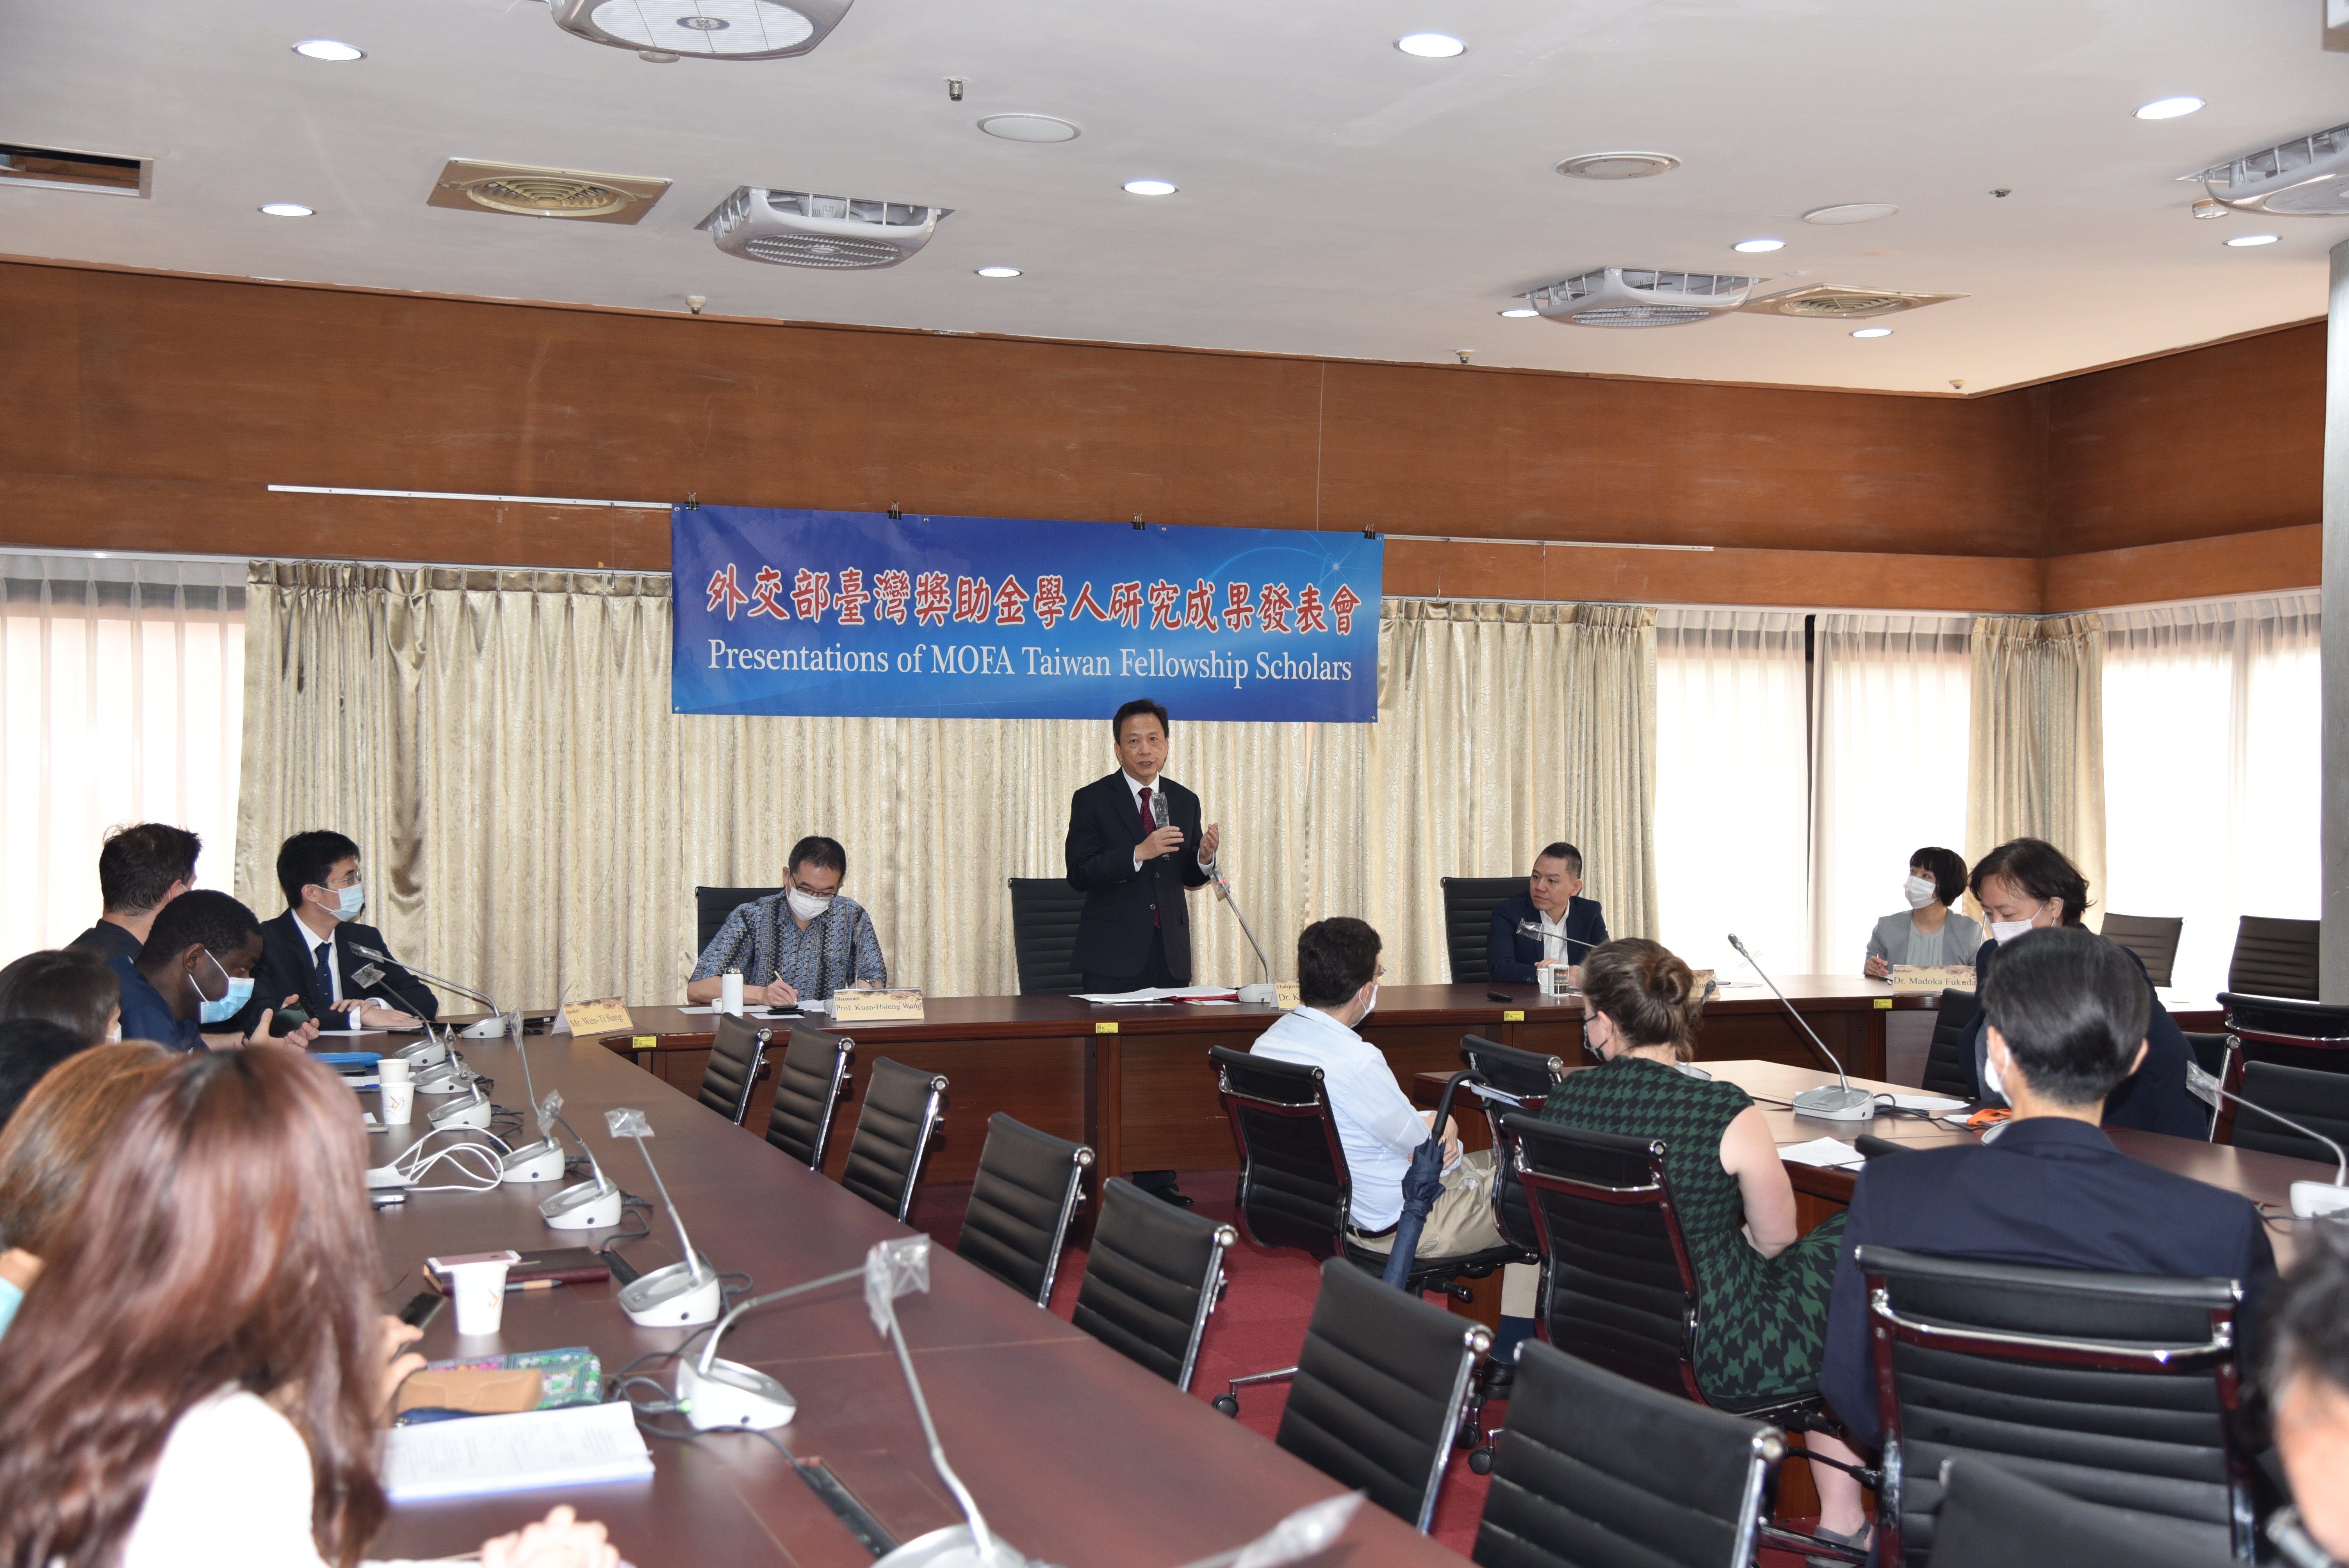 2021Presentations of MOFA Taiwan Fellowship Scholars: Stability and Prosperity in the Indo-Pacific Region  – Taiwan